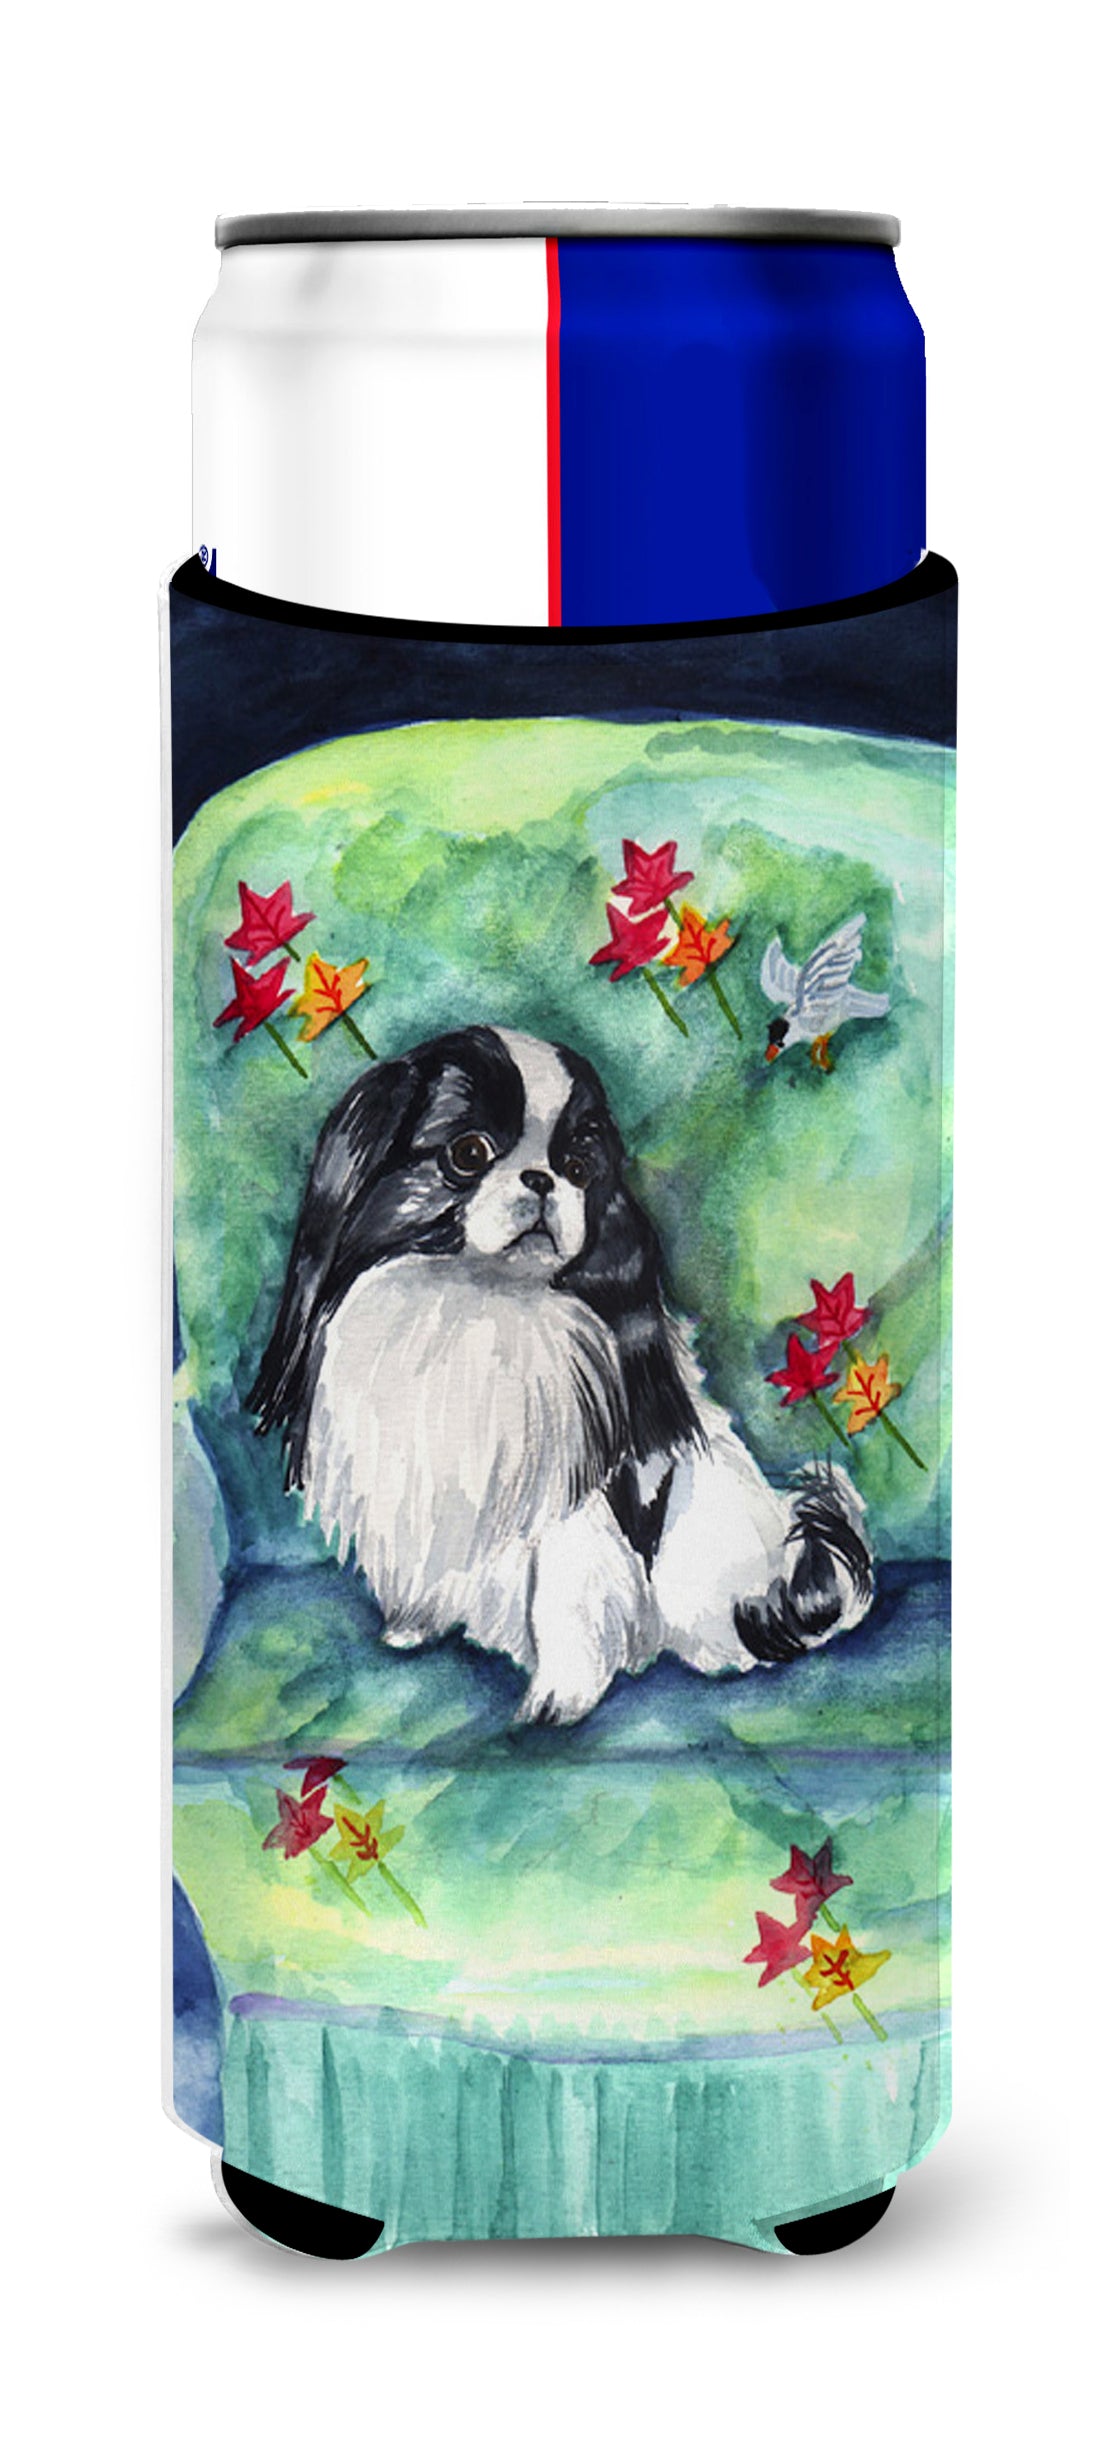 Japanese Chin in Momma's Chair Ultra Beverage Insulators for slim cans 7034MUK